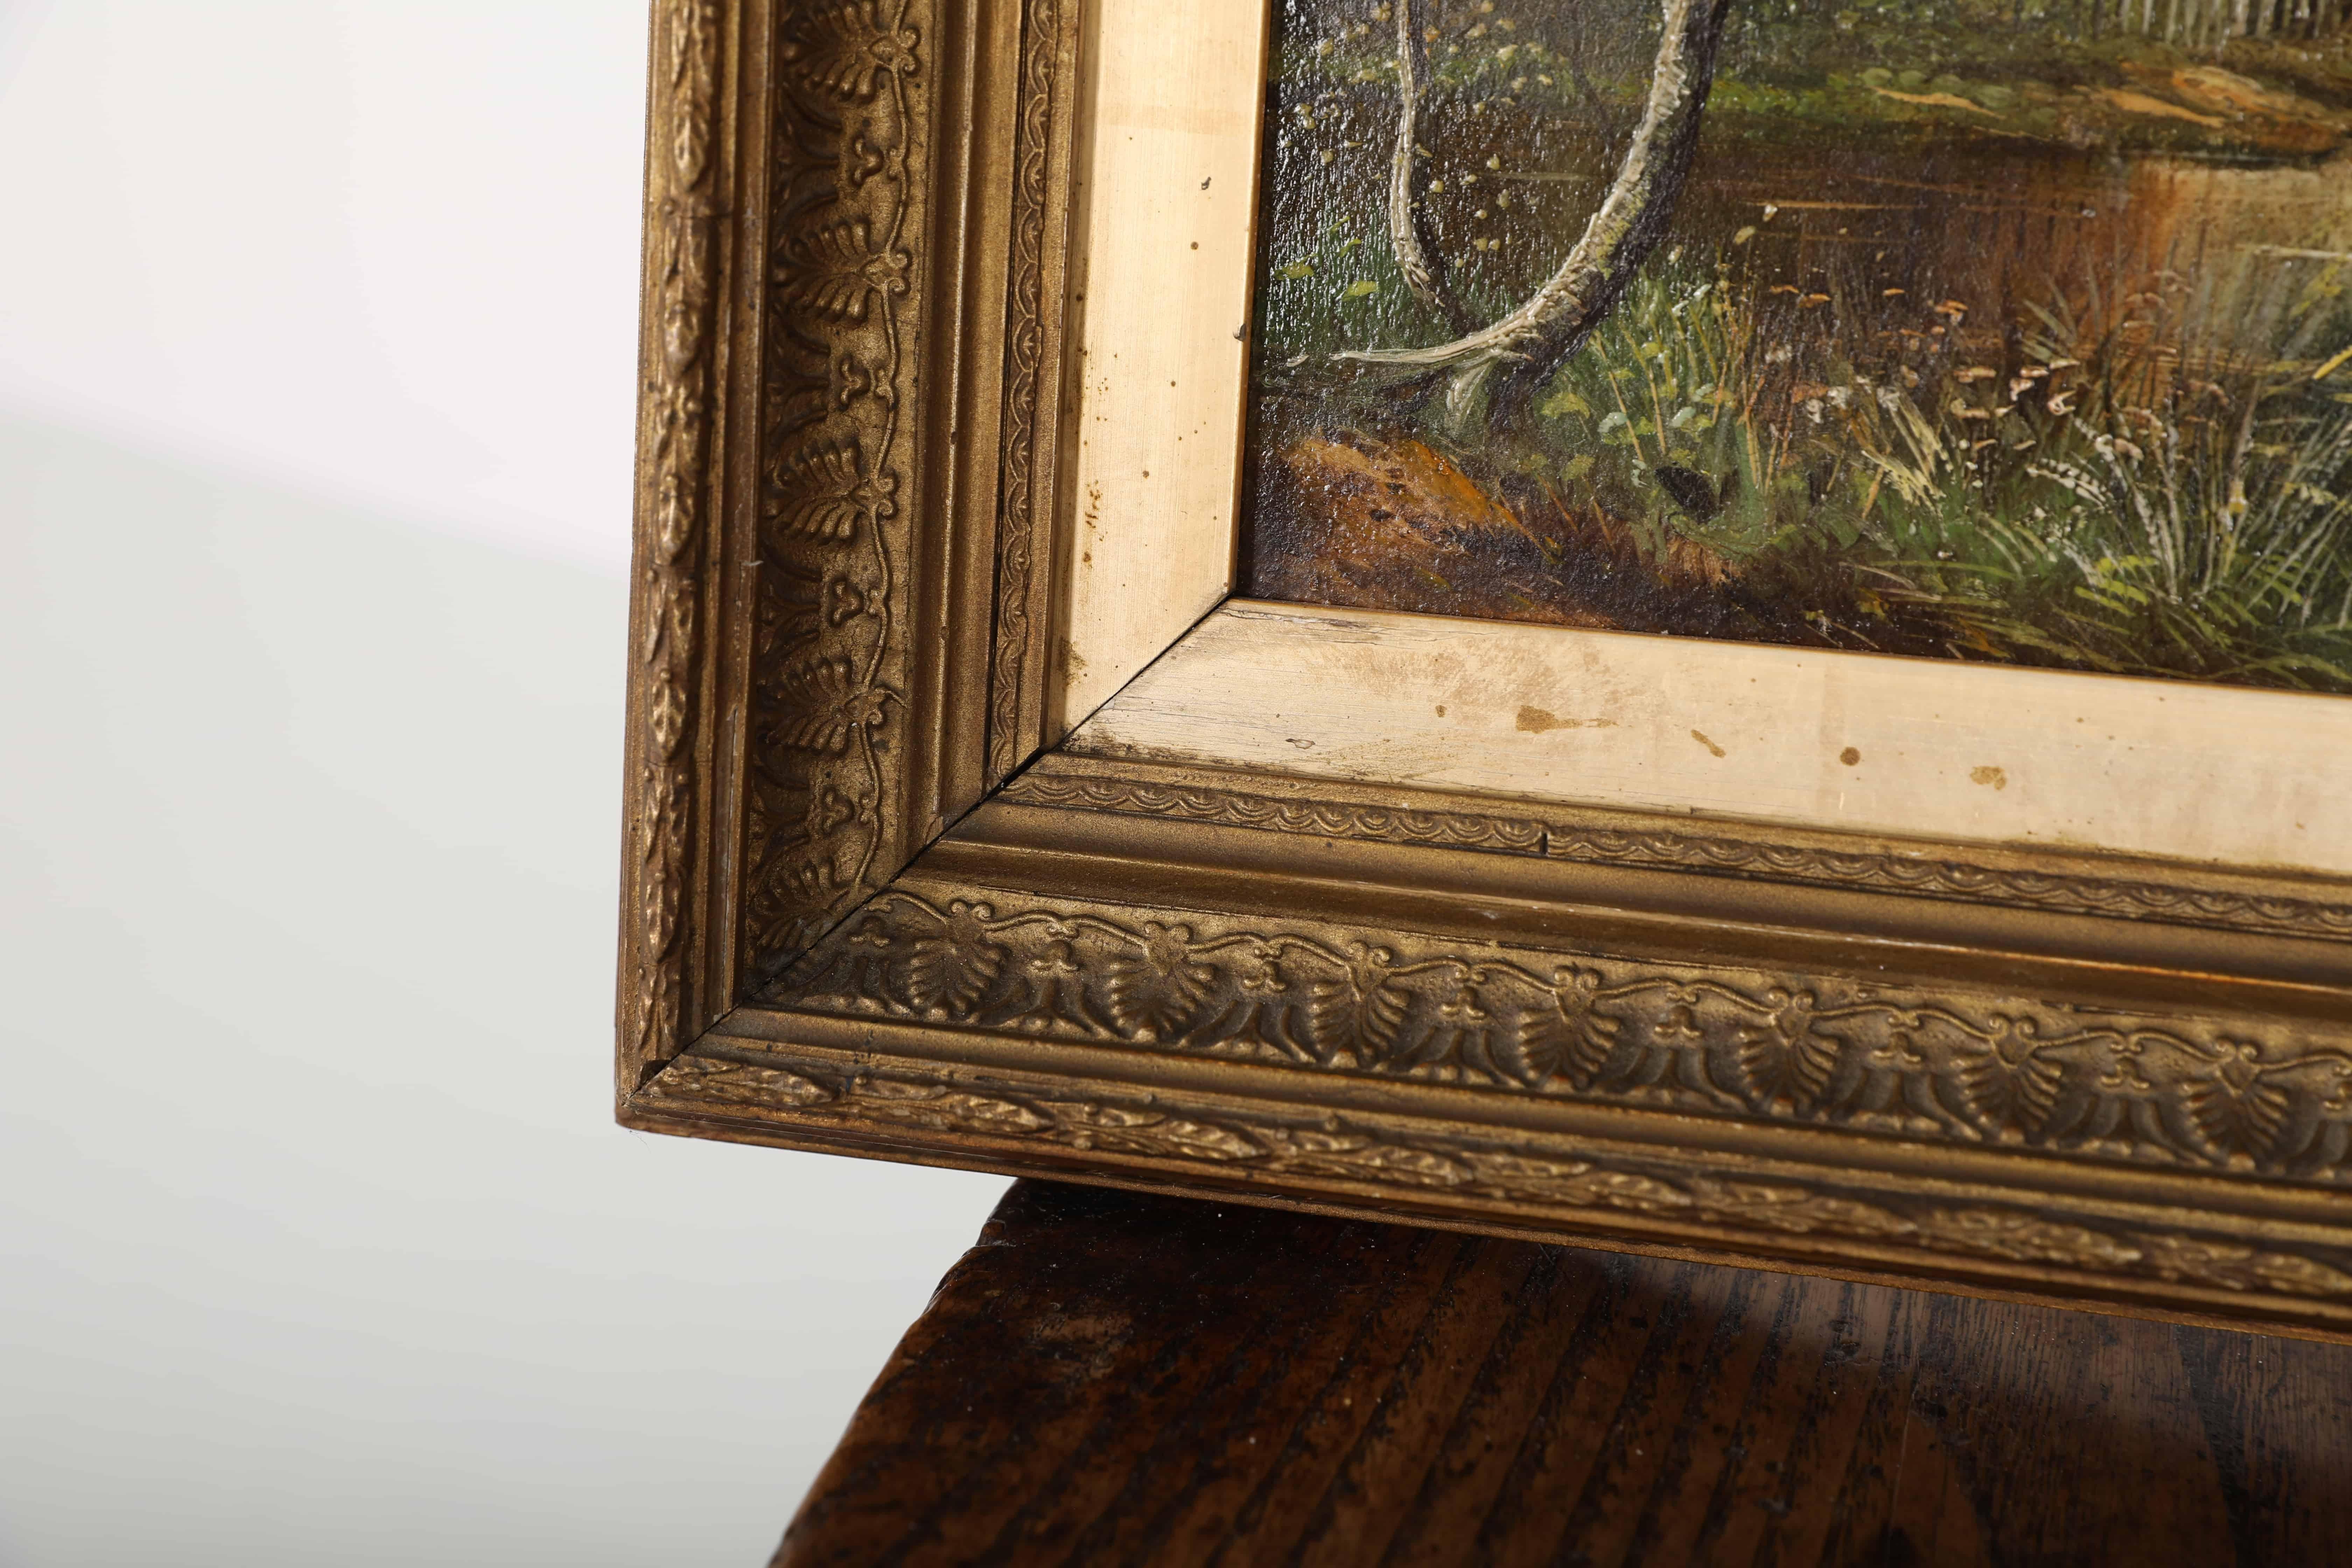 English Pair of 19th Century Landscape Oil Paintings in Original Gilt Frames. c.1890